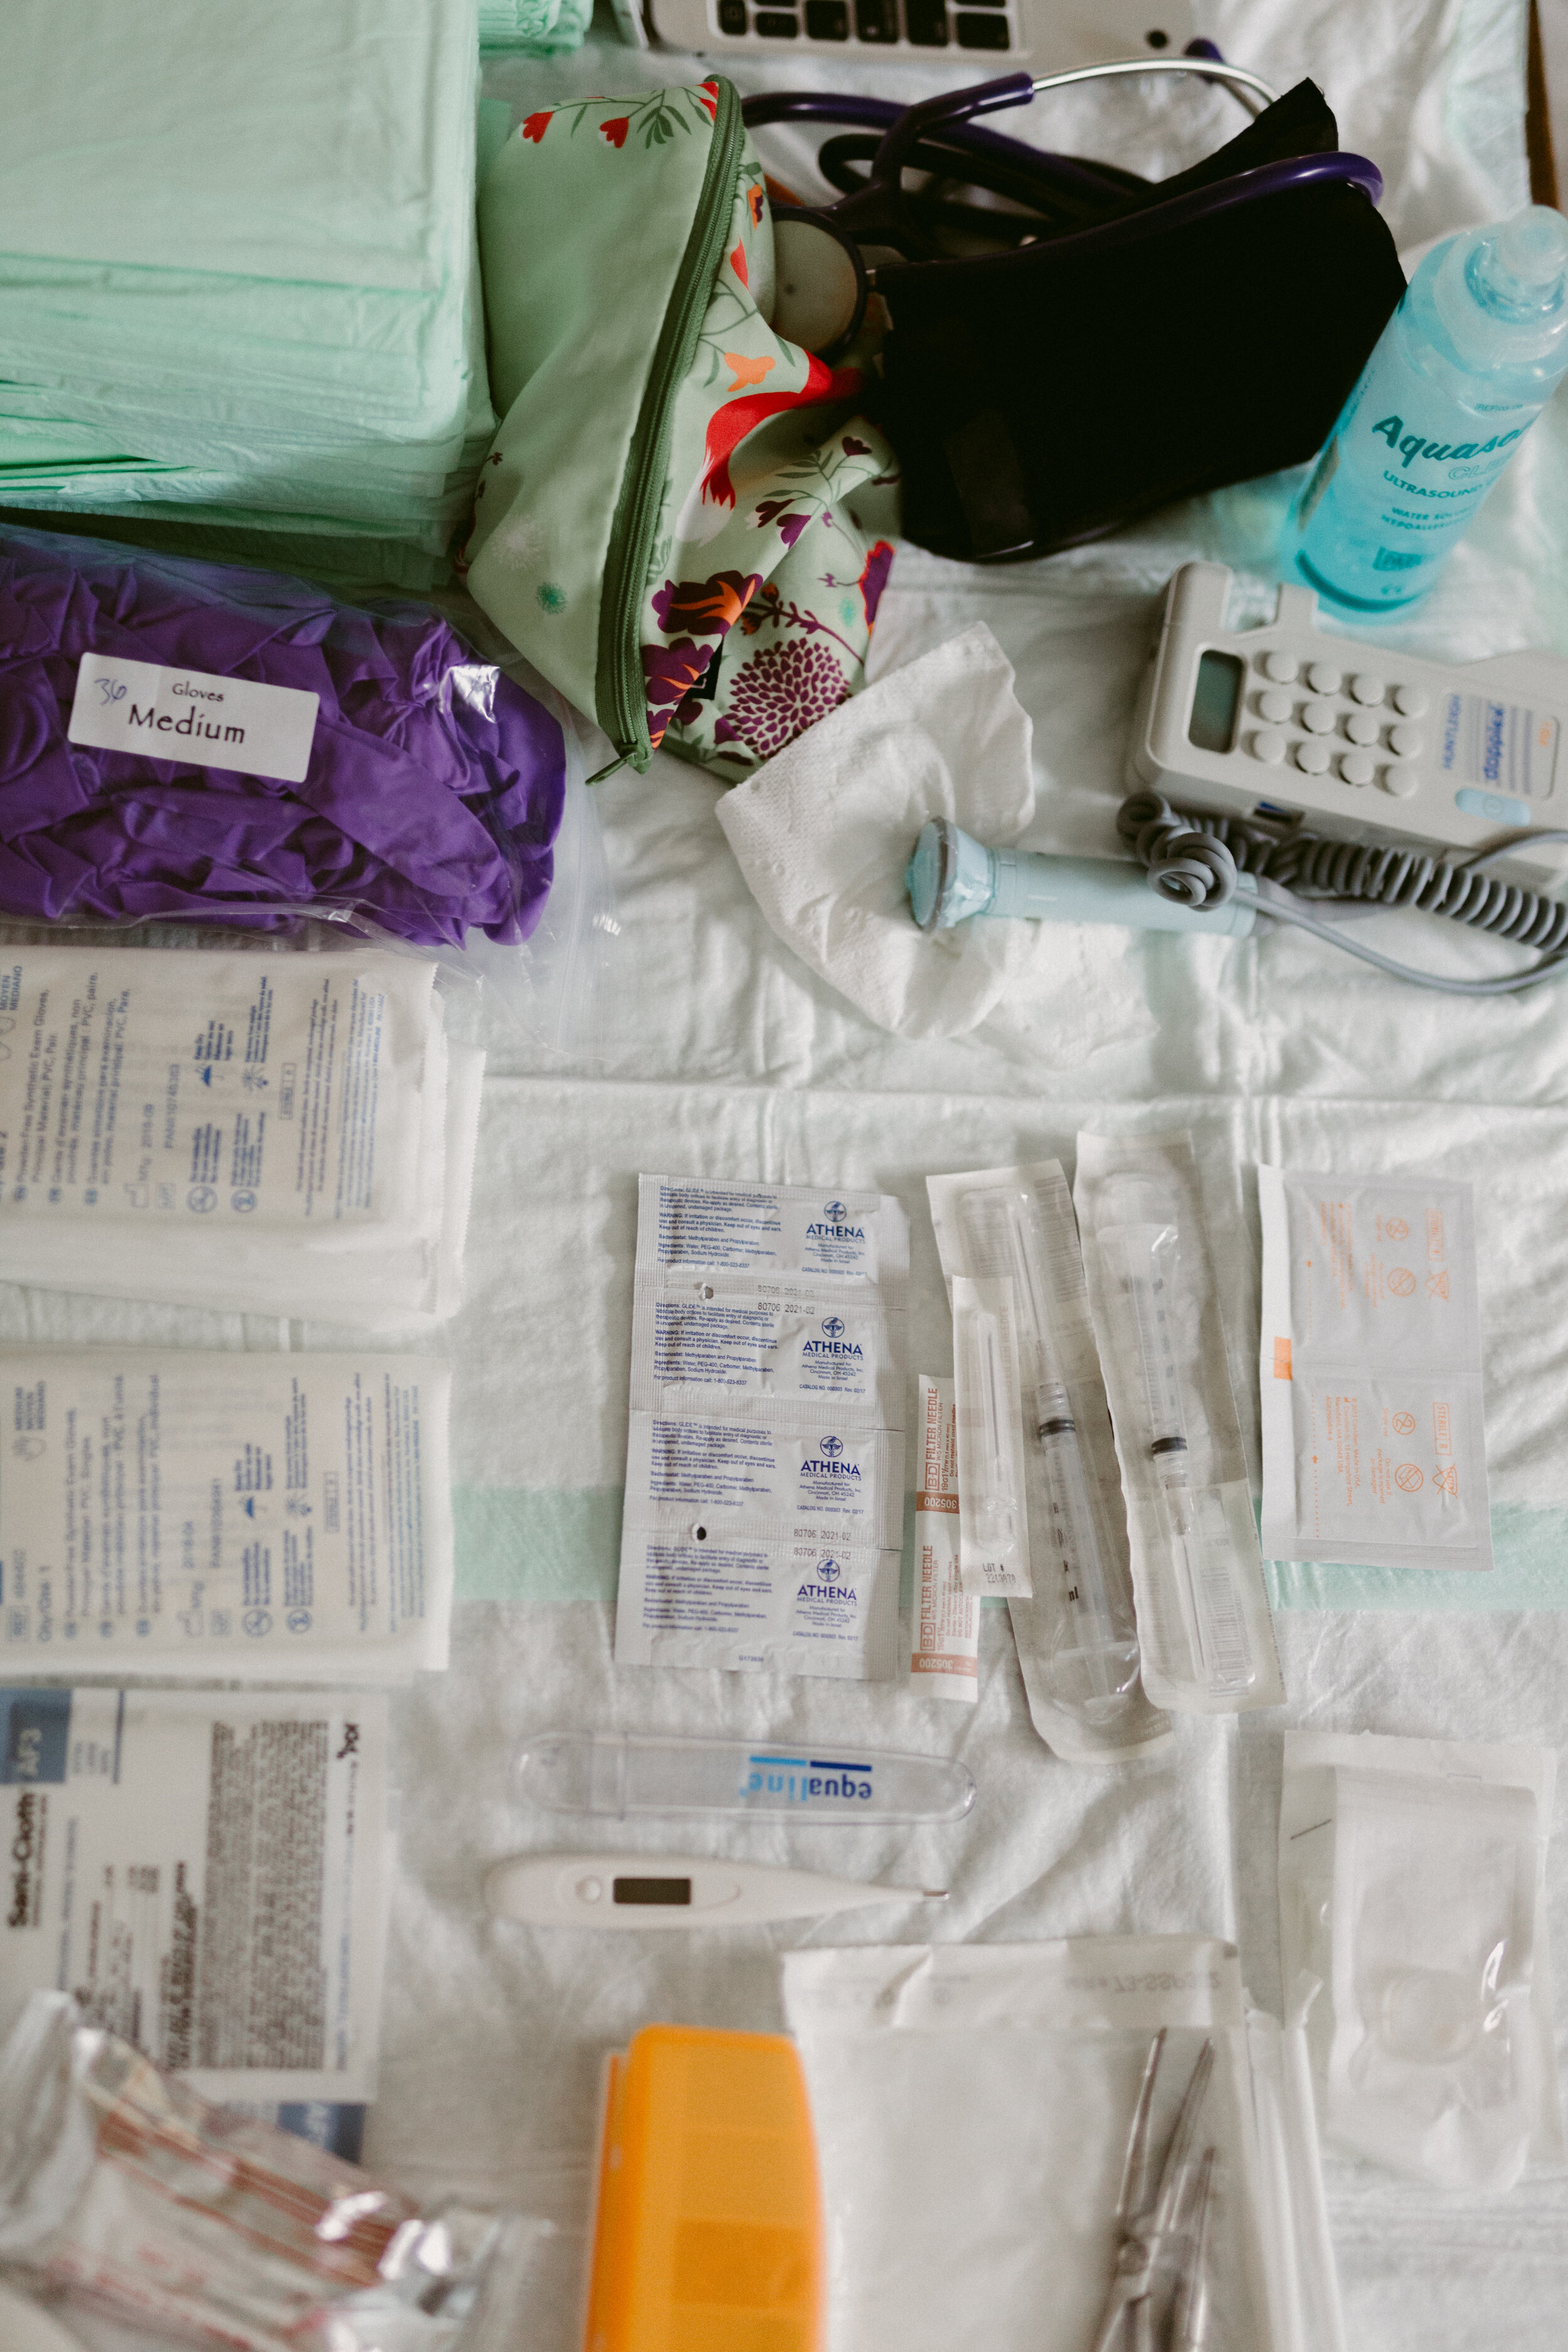 The midwife has laid out medical supplies on a sterile surface in preparation for a home birth.